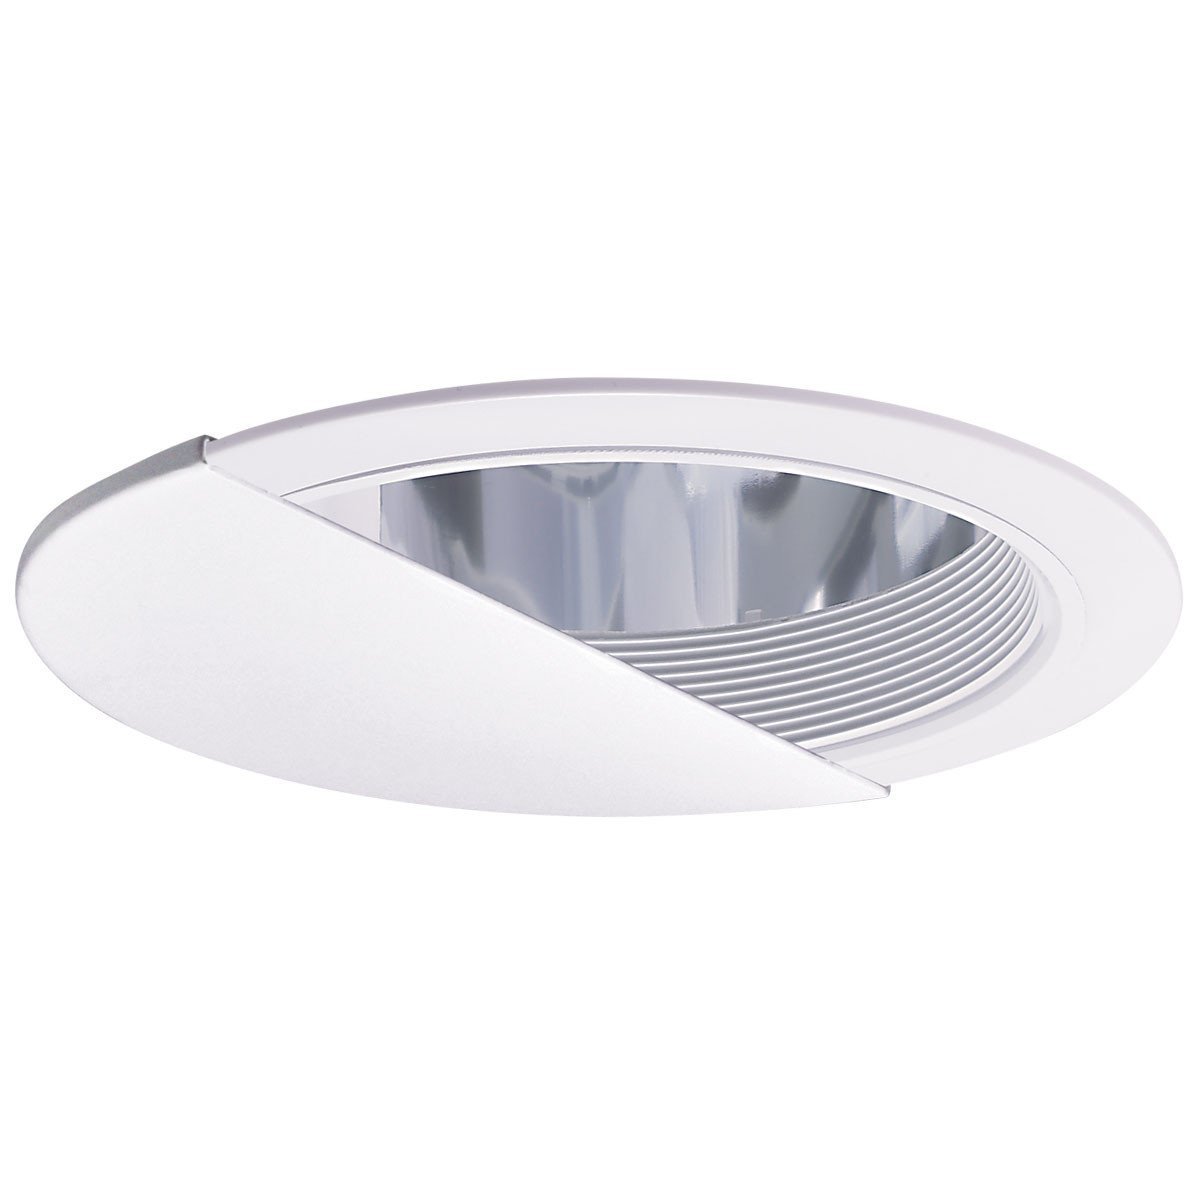 Specular Clear Reflector, White Baffle, Wall Wash & Plastic Ring Recessed Nora Lighting 